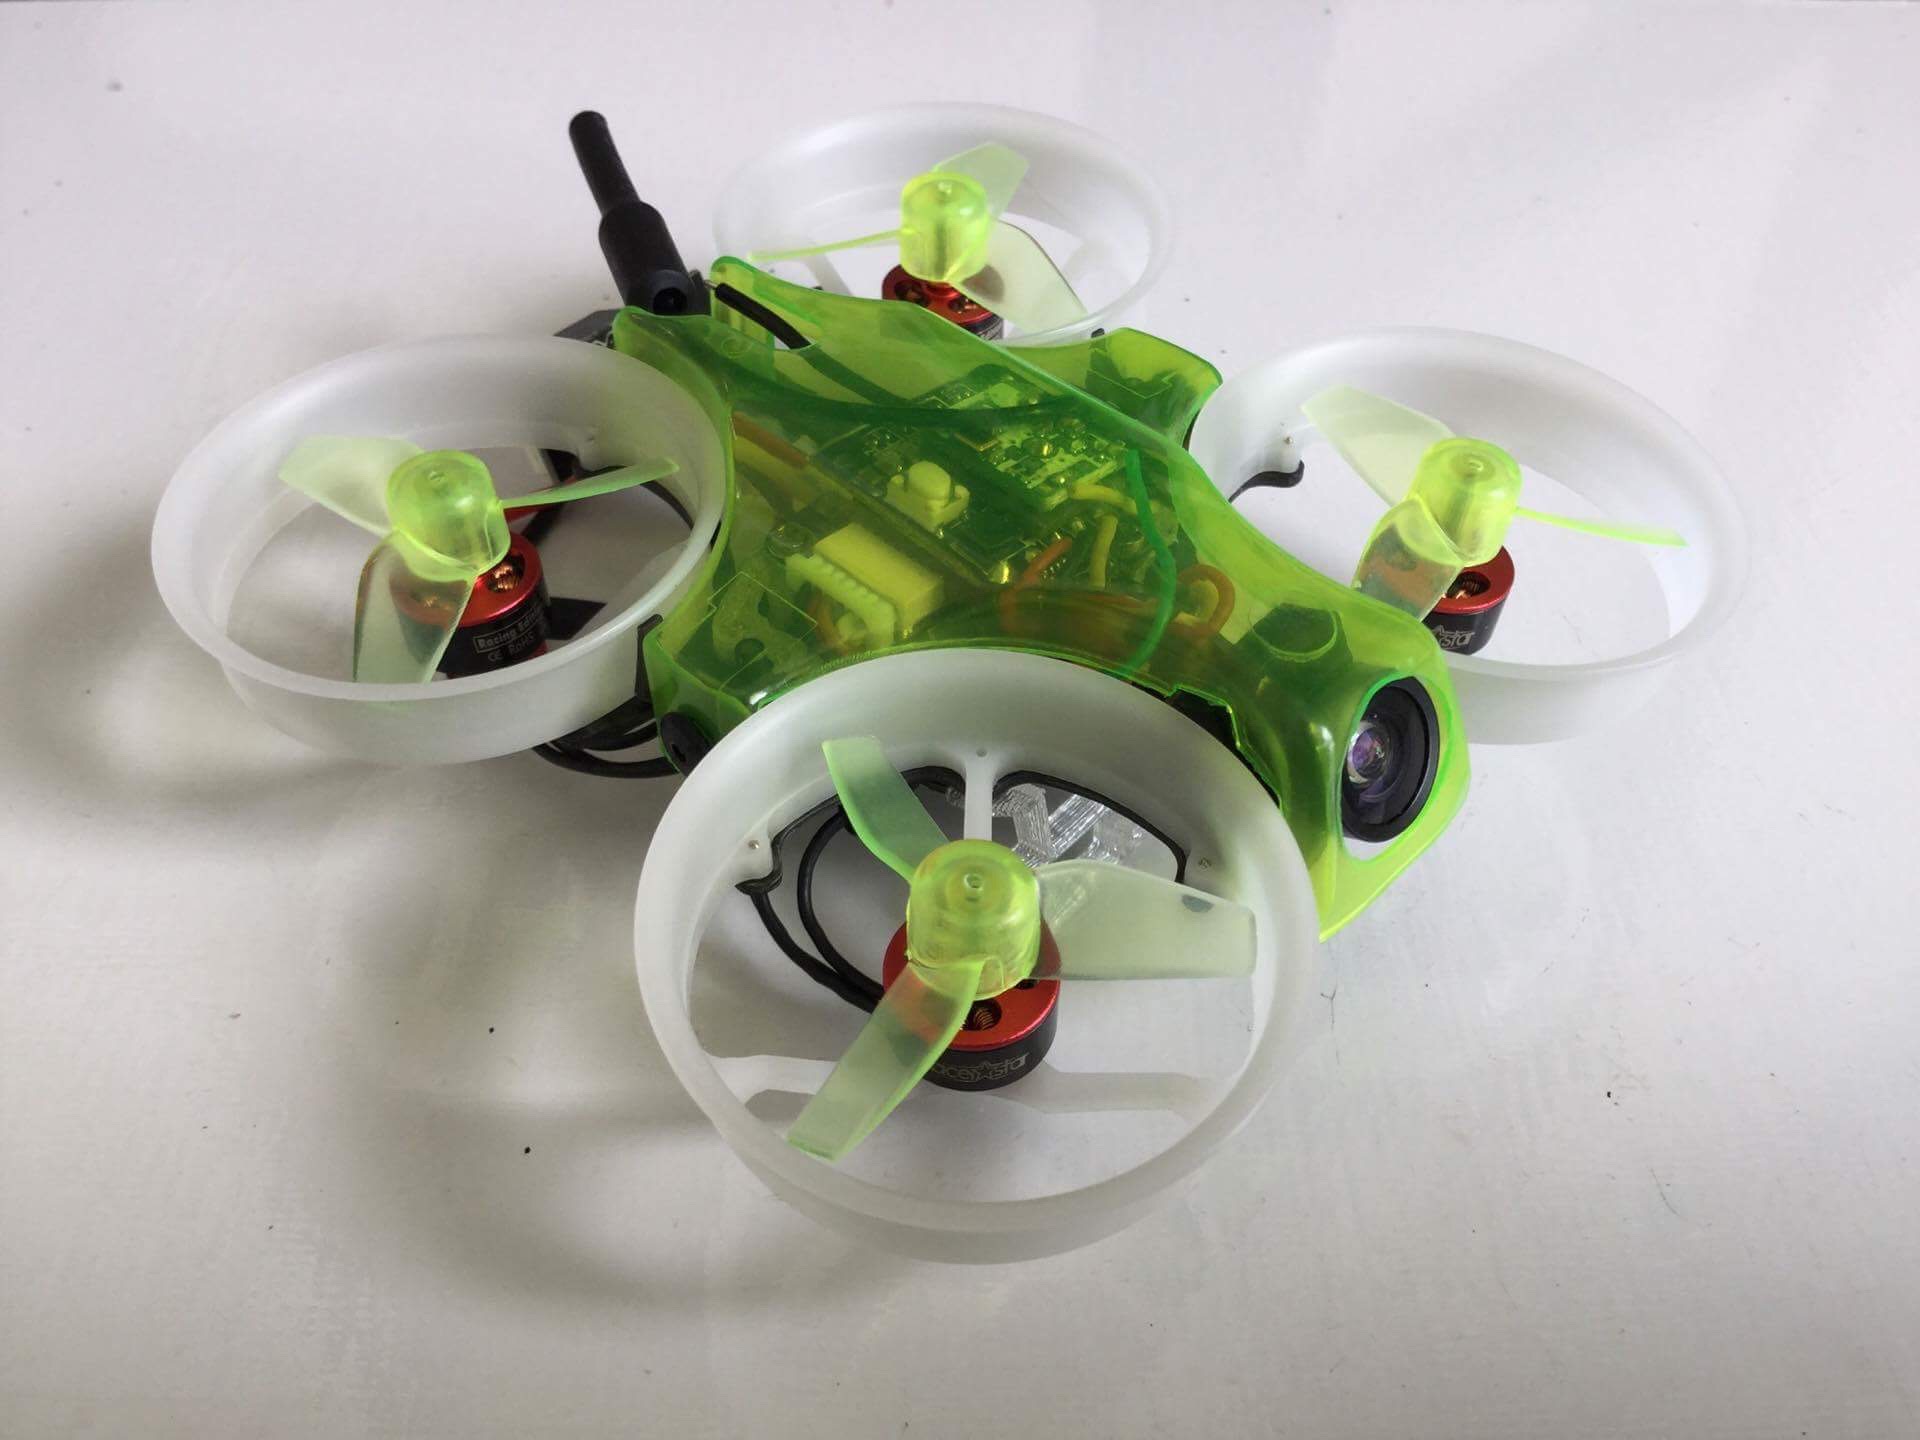 brushless tiny whoop build